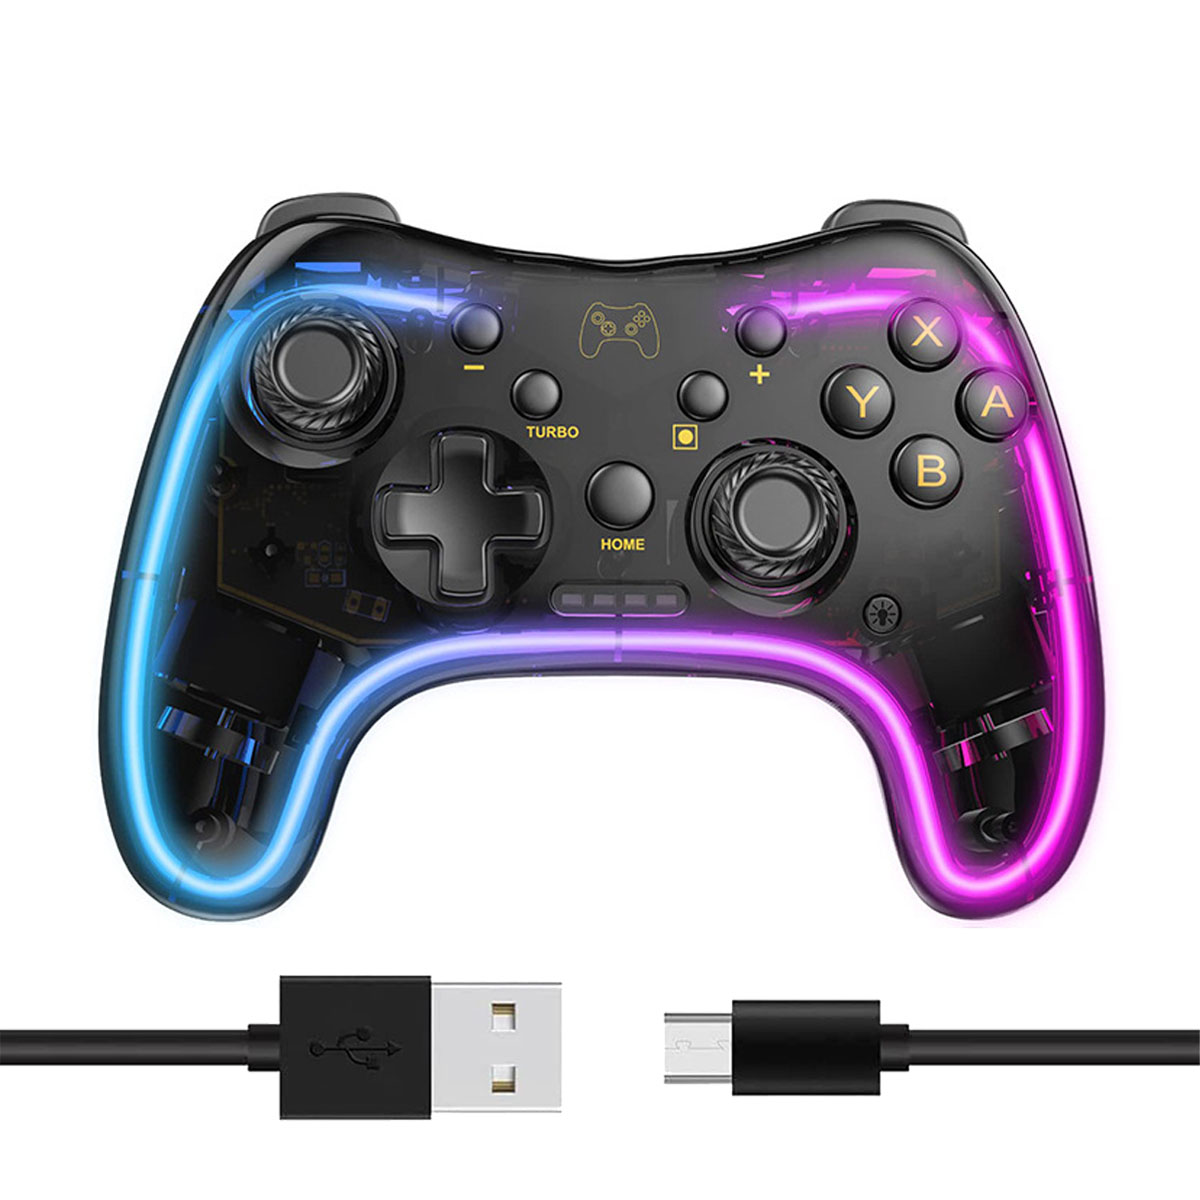 RESPIEL Gamepad, Wireless Controller Lite/OLED/Android/iOS, PC/Switch Controller, für Blackout Blackout Gamepad, Bluetooth